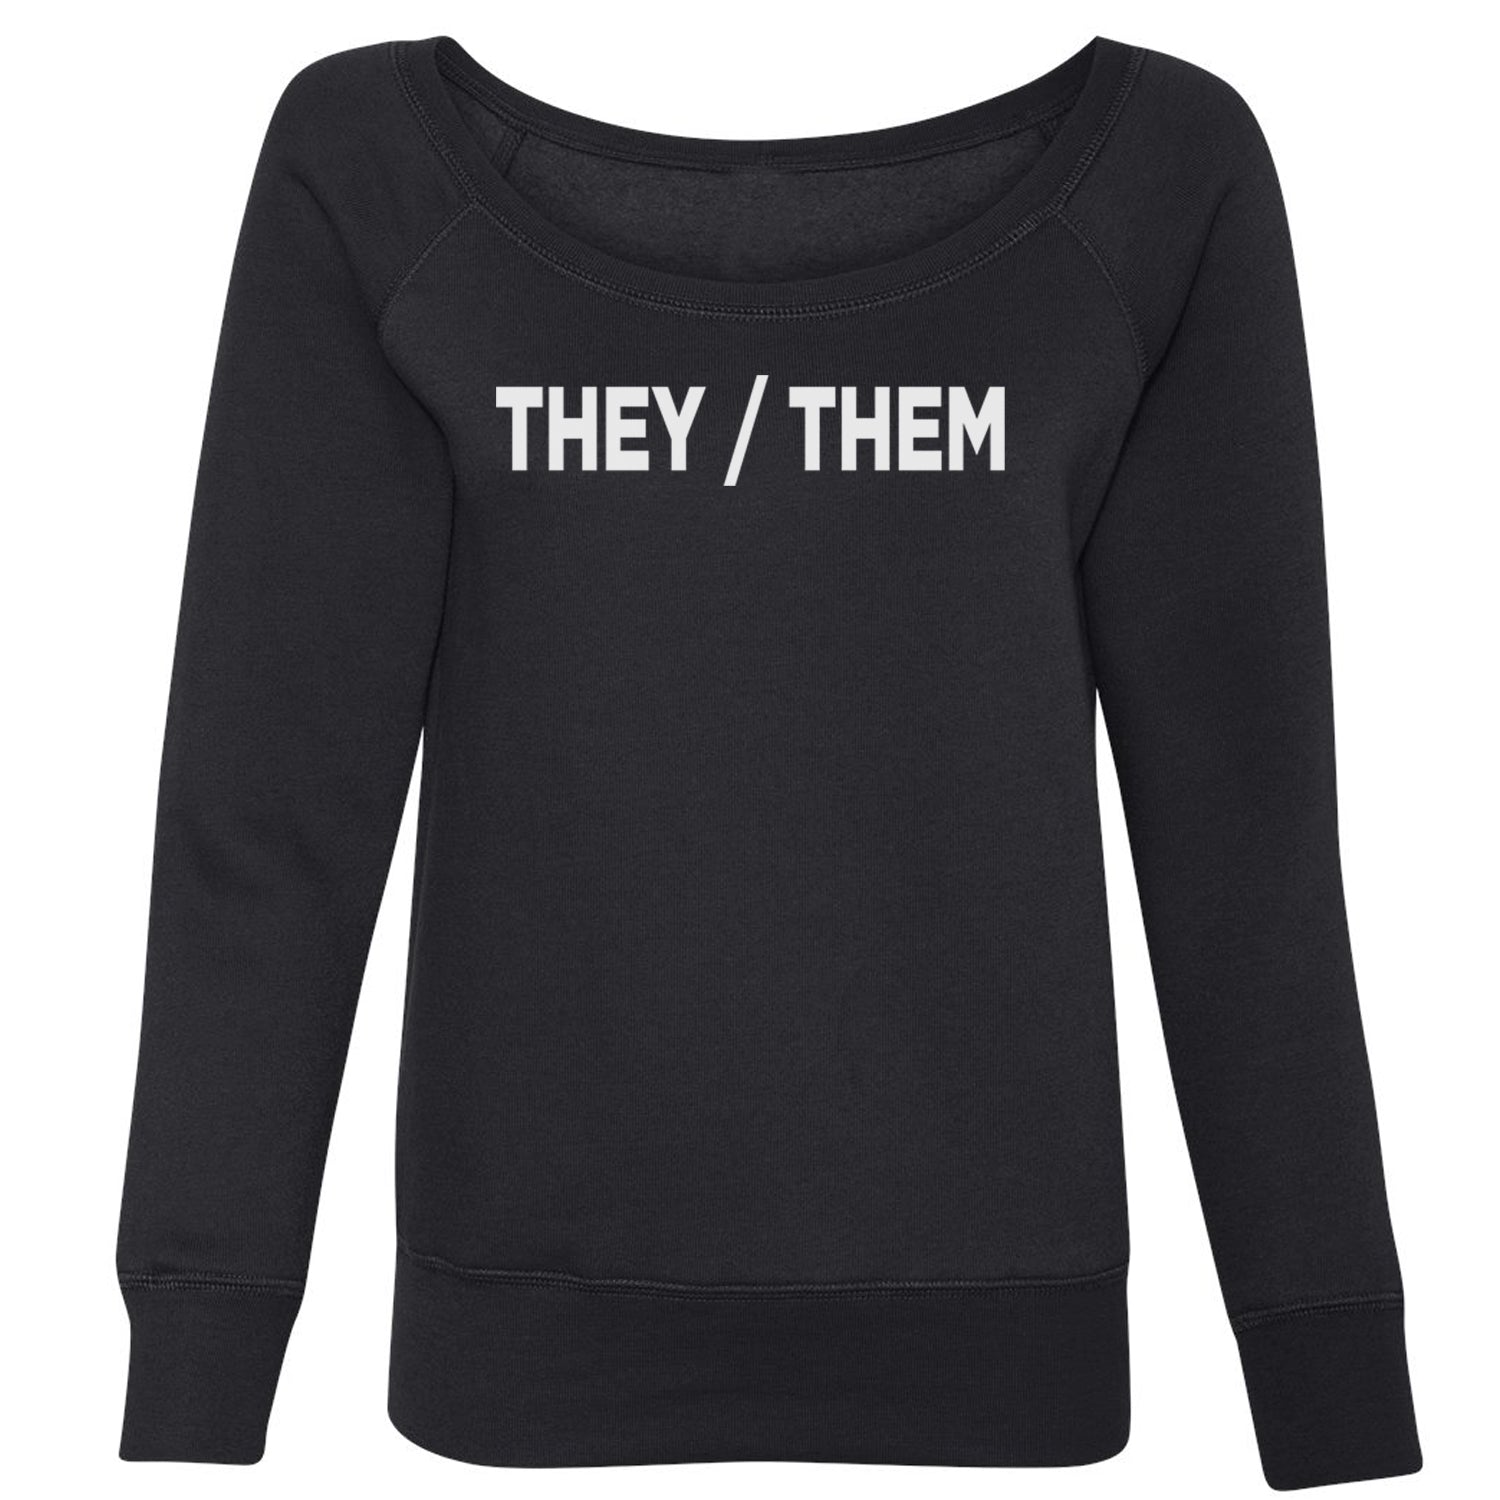 They Them Gender Pronouns Diversity and Inclusion Slouchy Off Shoulder Oversized Sweatshirt binary, civil, gay, he, her, him, nonbinary, pride, rights, she, them, they by Expression Tees